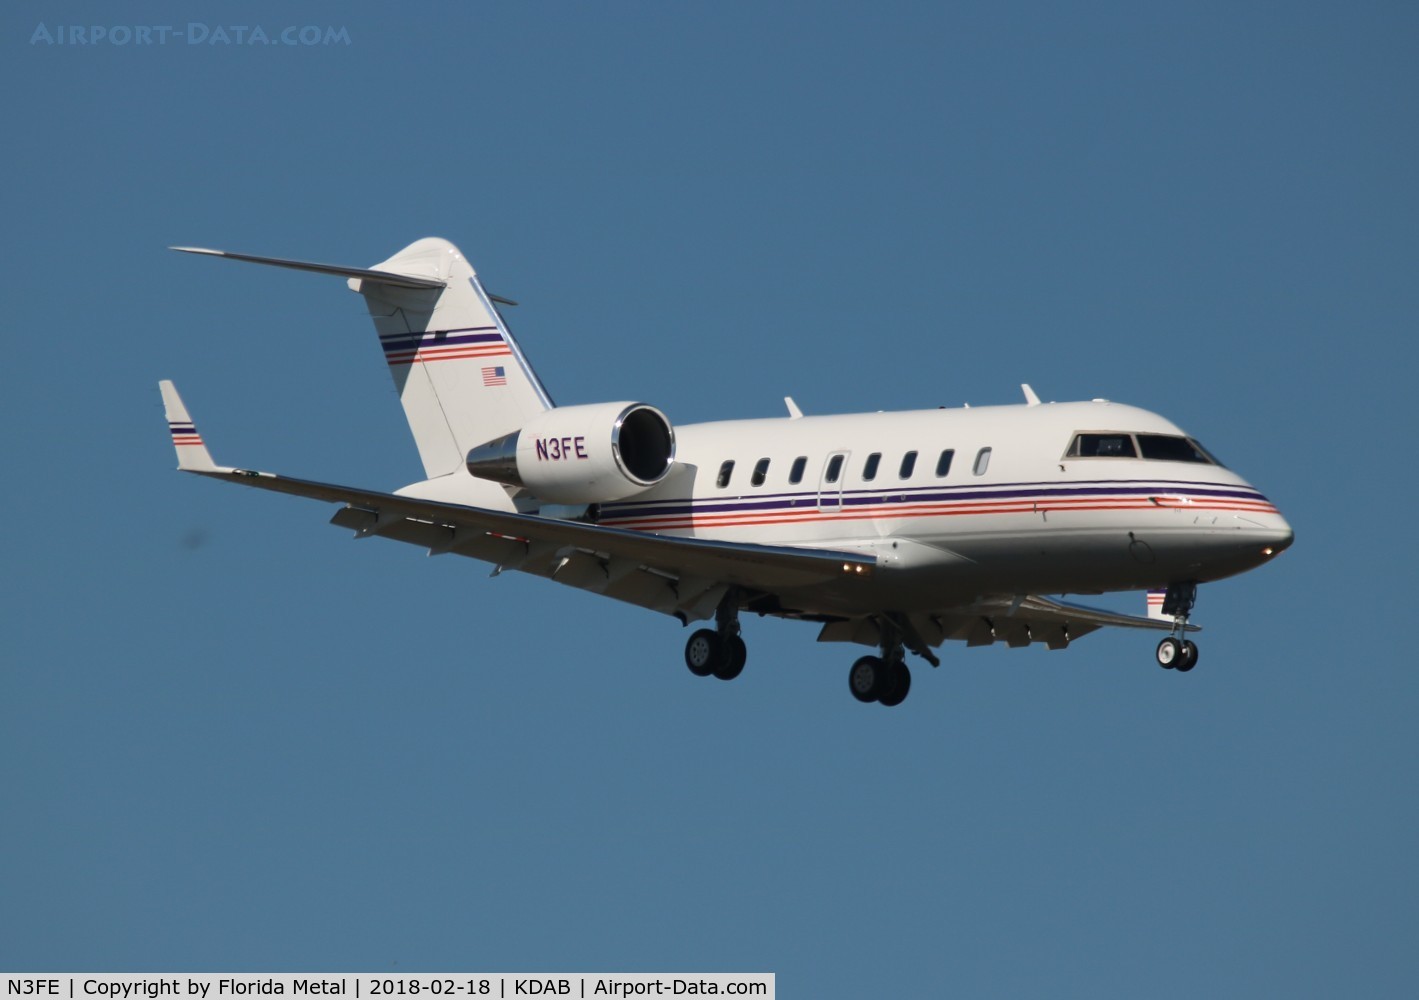 N3FE, 2007 Bombardier Challenger 605 (CL-600-2B16) C/N 5742, Challenger 605 zx